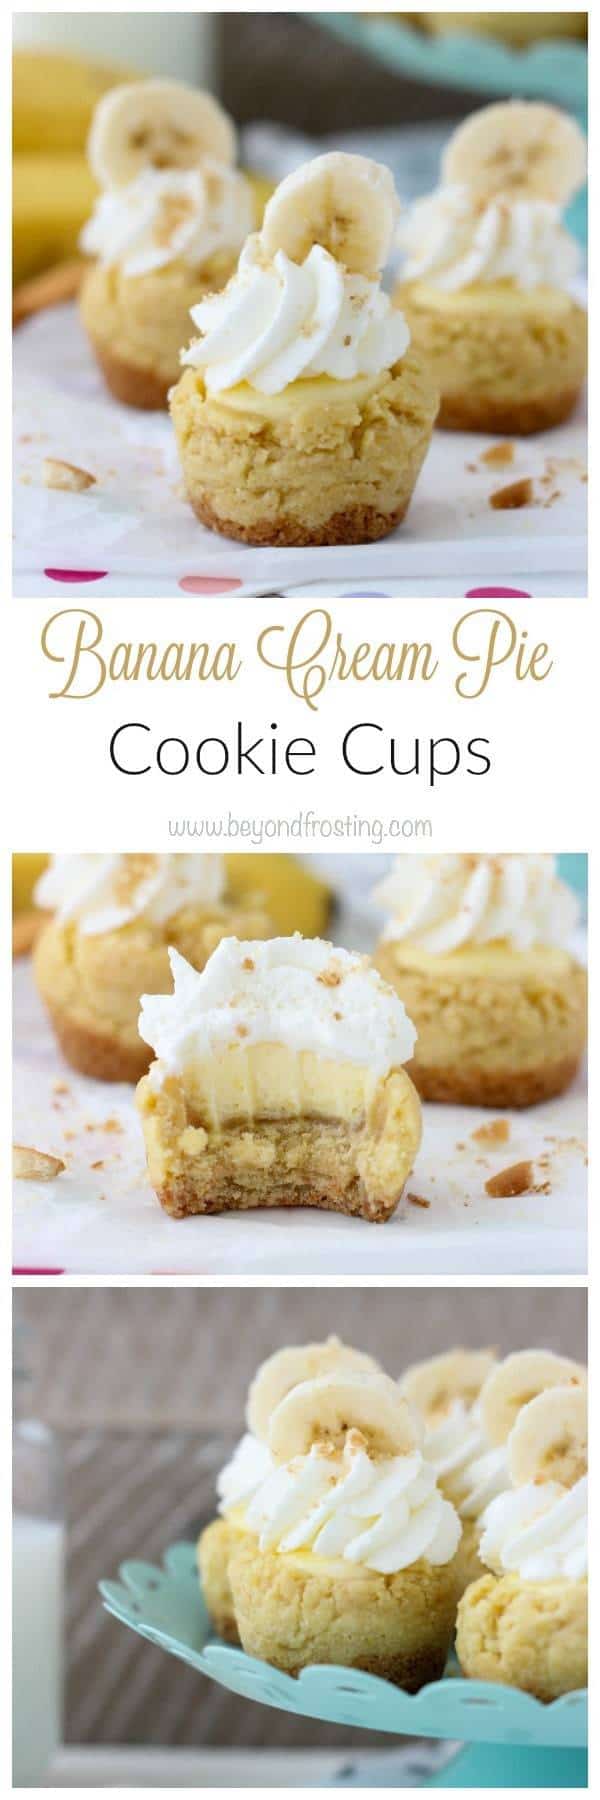 These irresistible Banana Cream Pie Cookie cups combine your favorite parts of banana cream pie but in a mini cookie cup instead of pie crust.